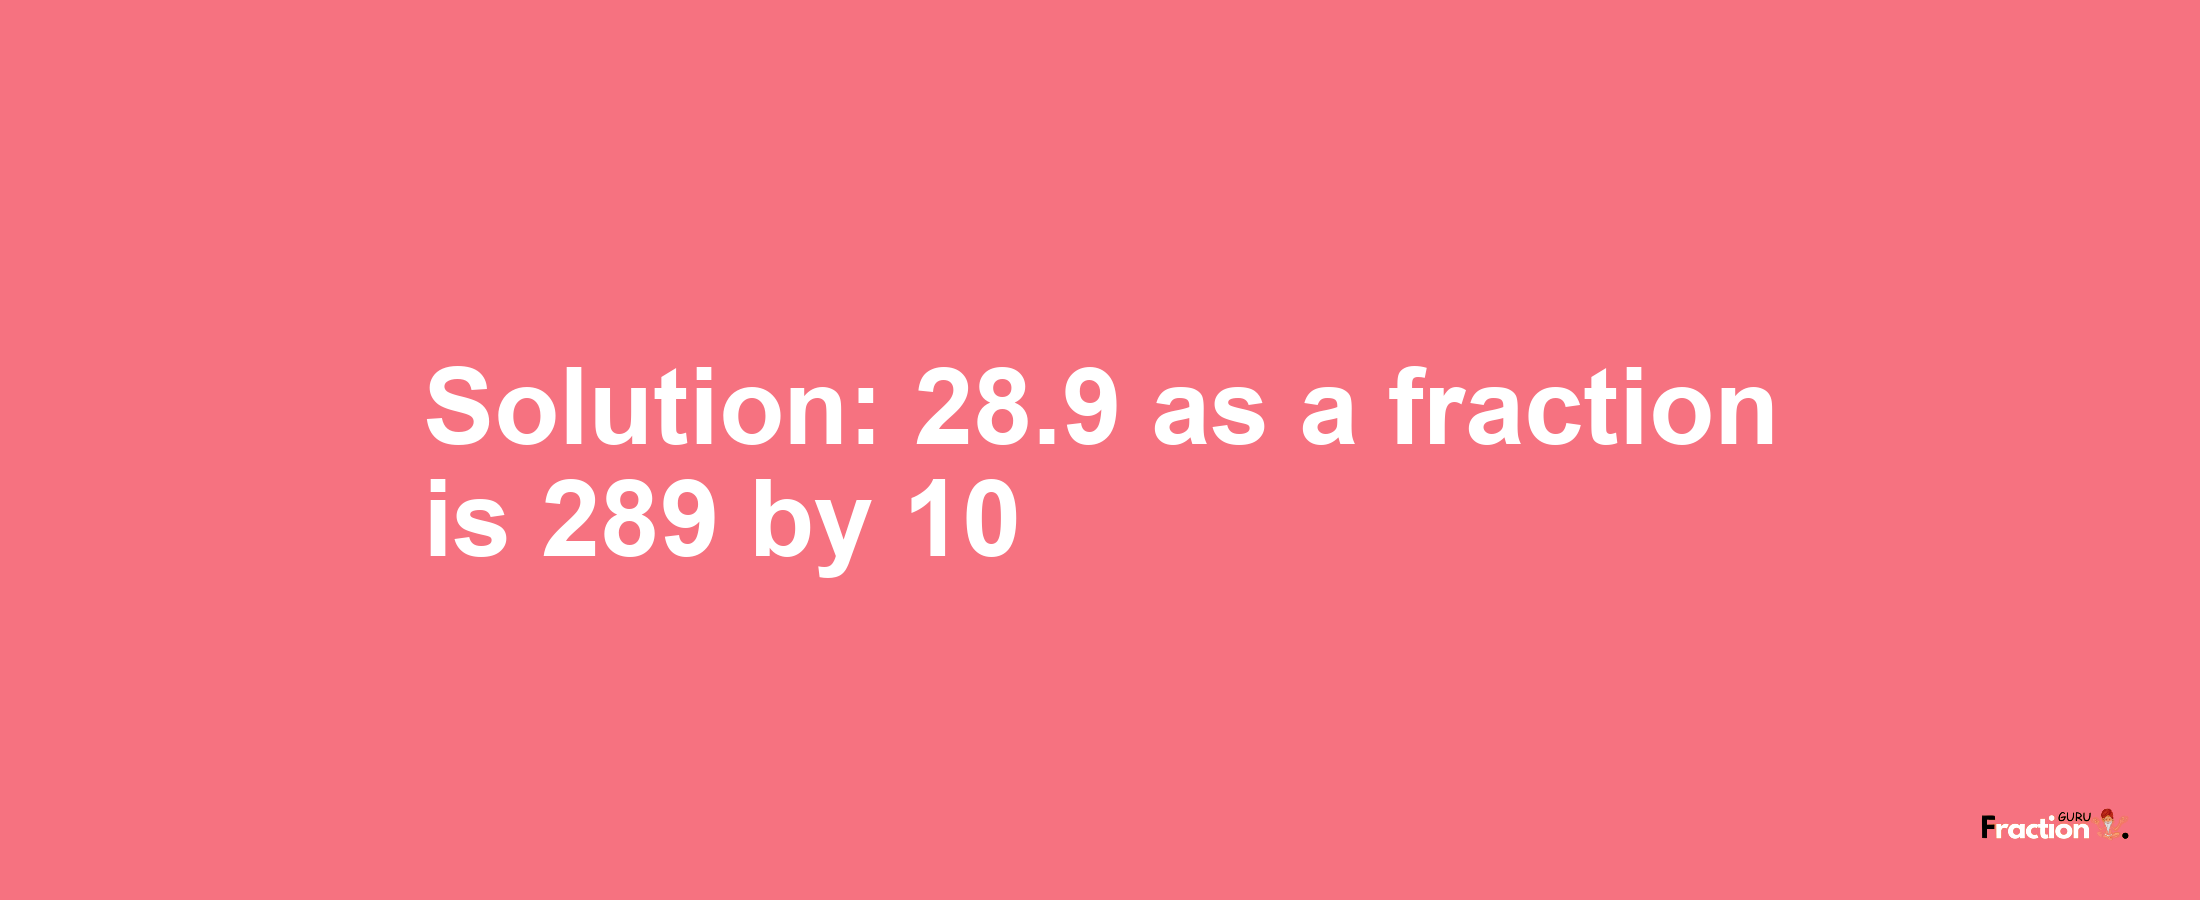 Solution:28.9 as a fraction is 289/10